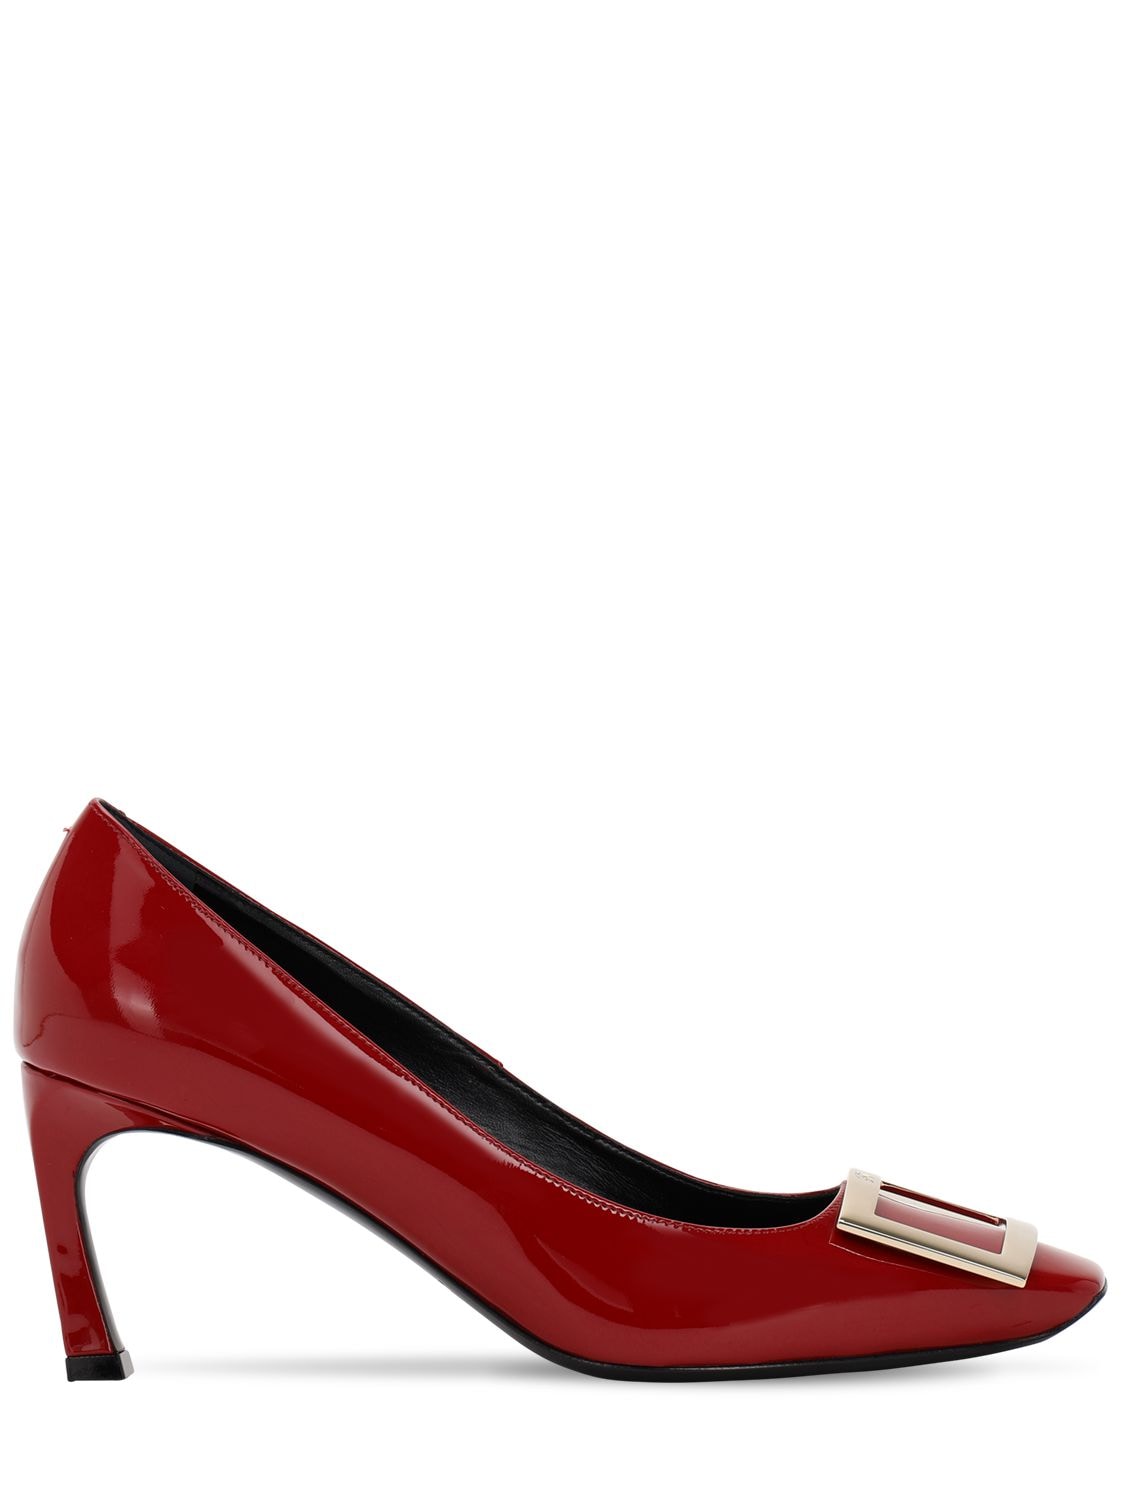 Roger Vivier 70mm Trompette Patent Leather Pumps In Dark Red